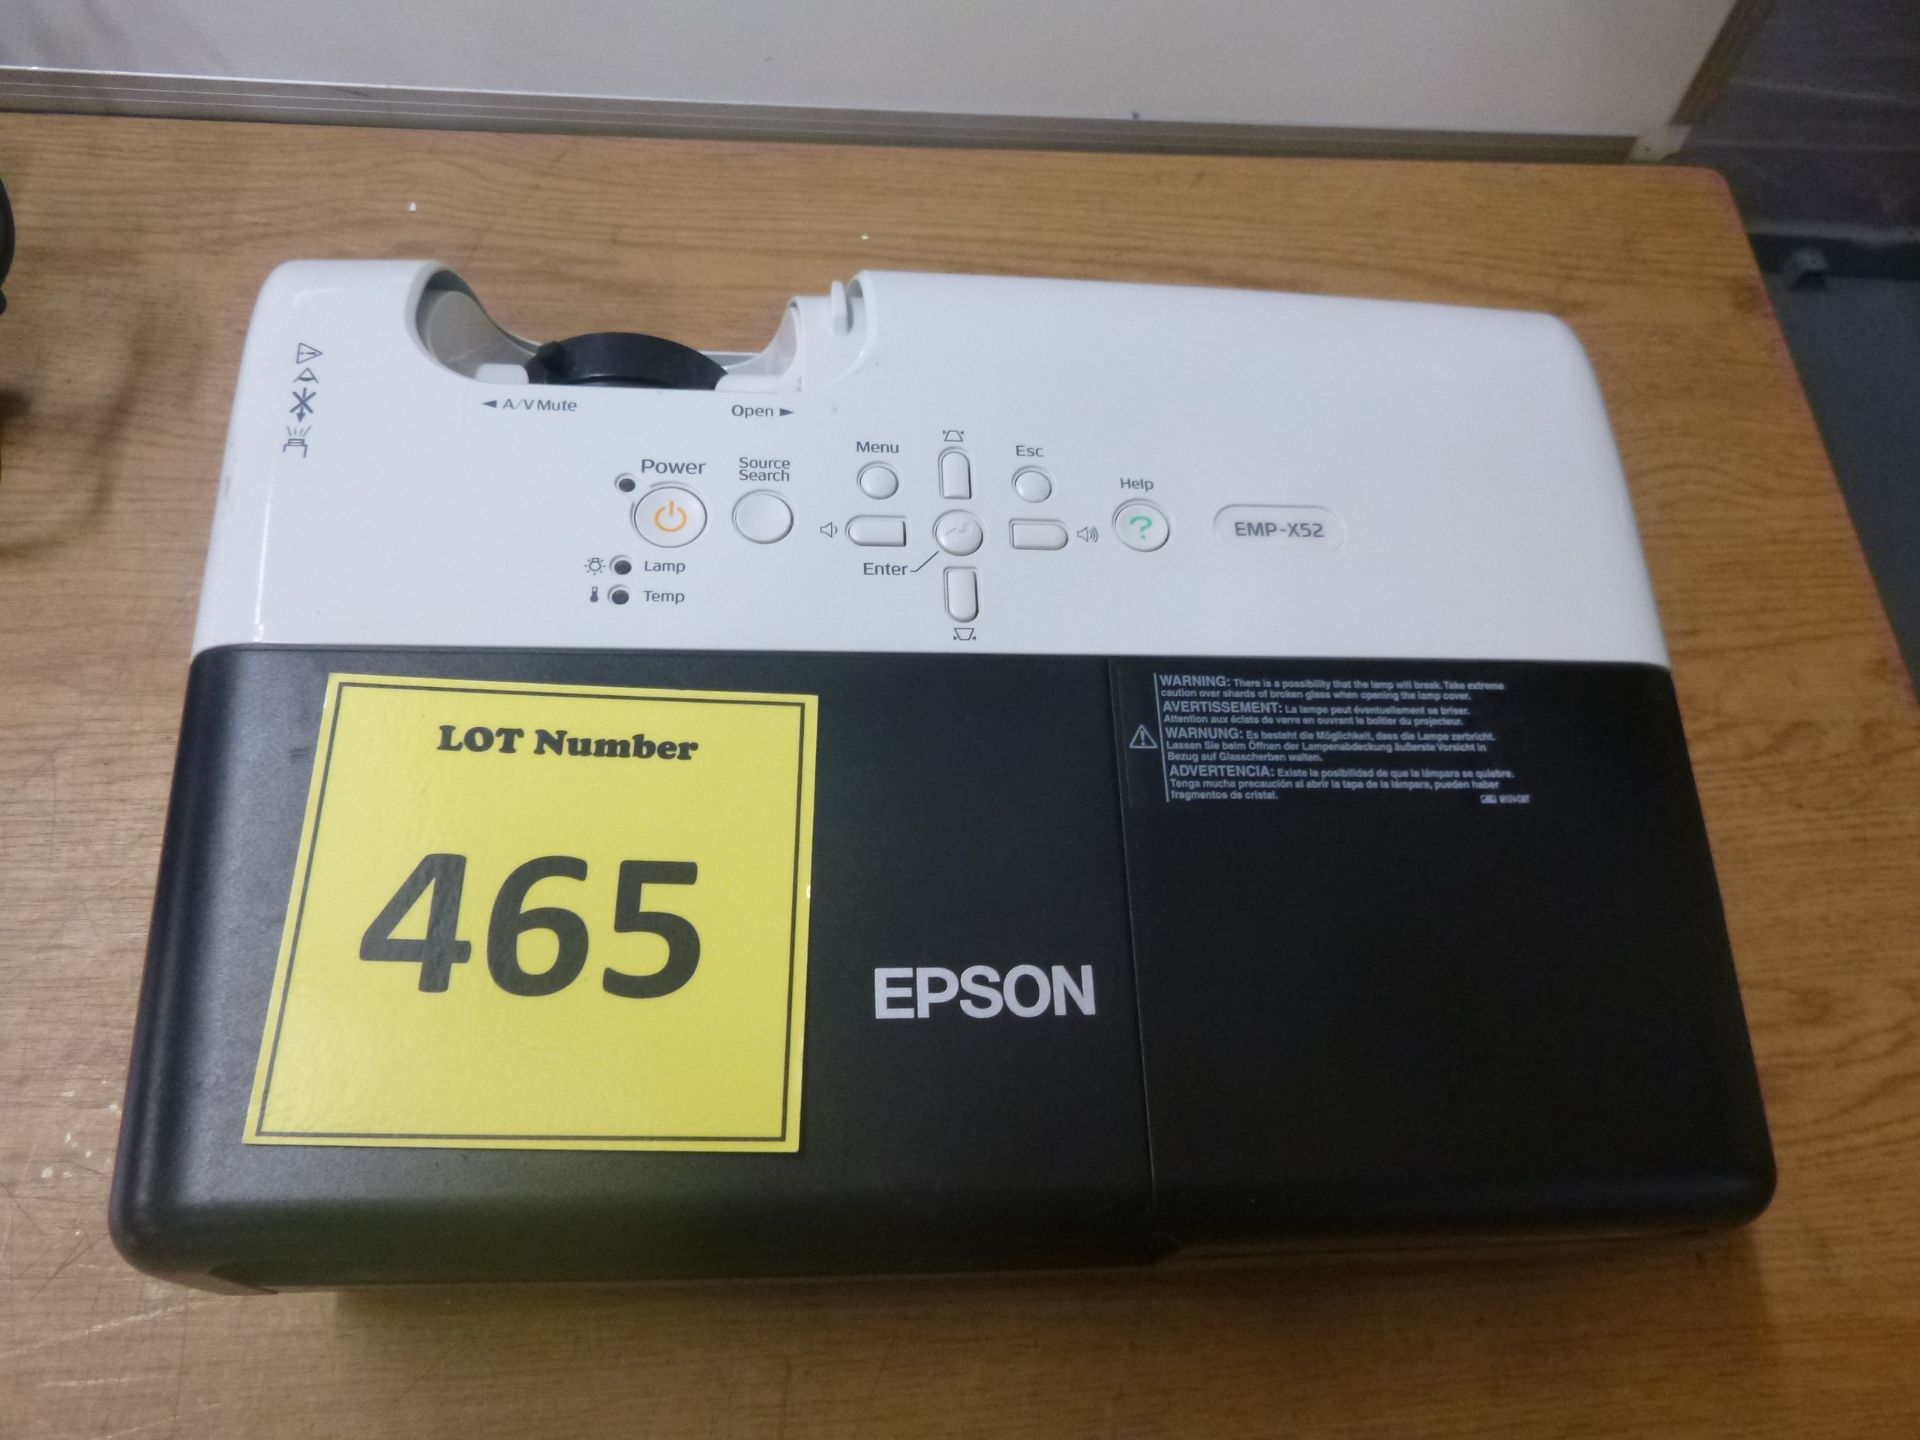 EPSON 3LCD PROJECTOR. MODEL EMP-X52. SEE PHOTO FOR LAMP HOURS.